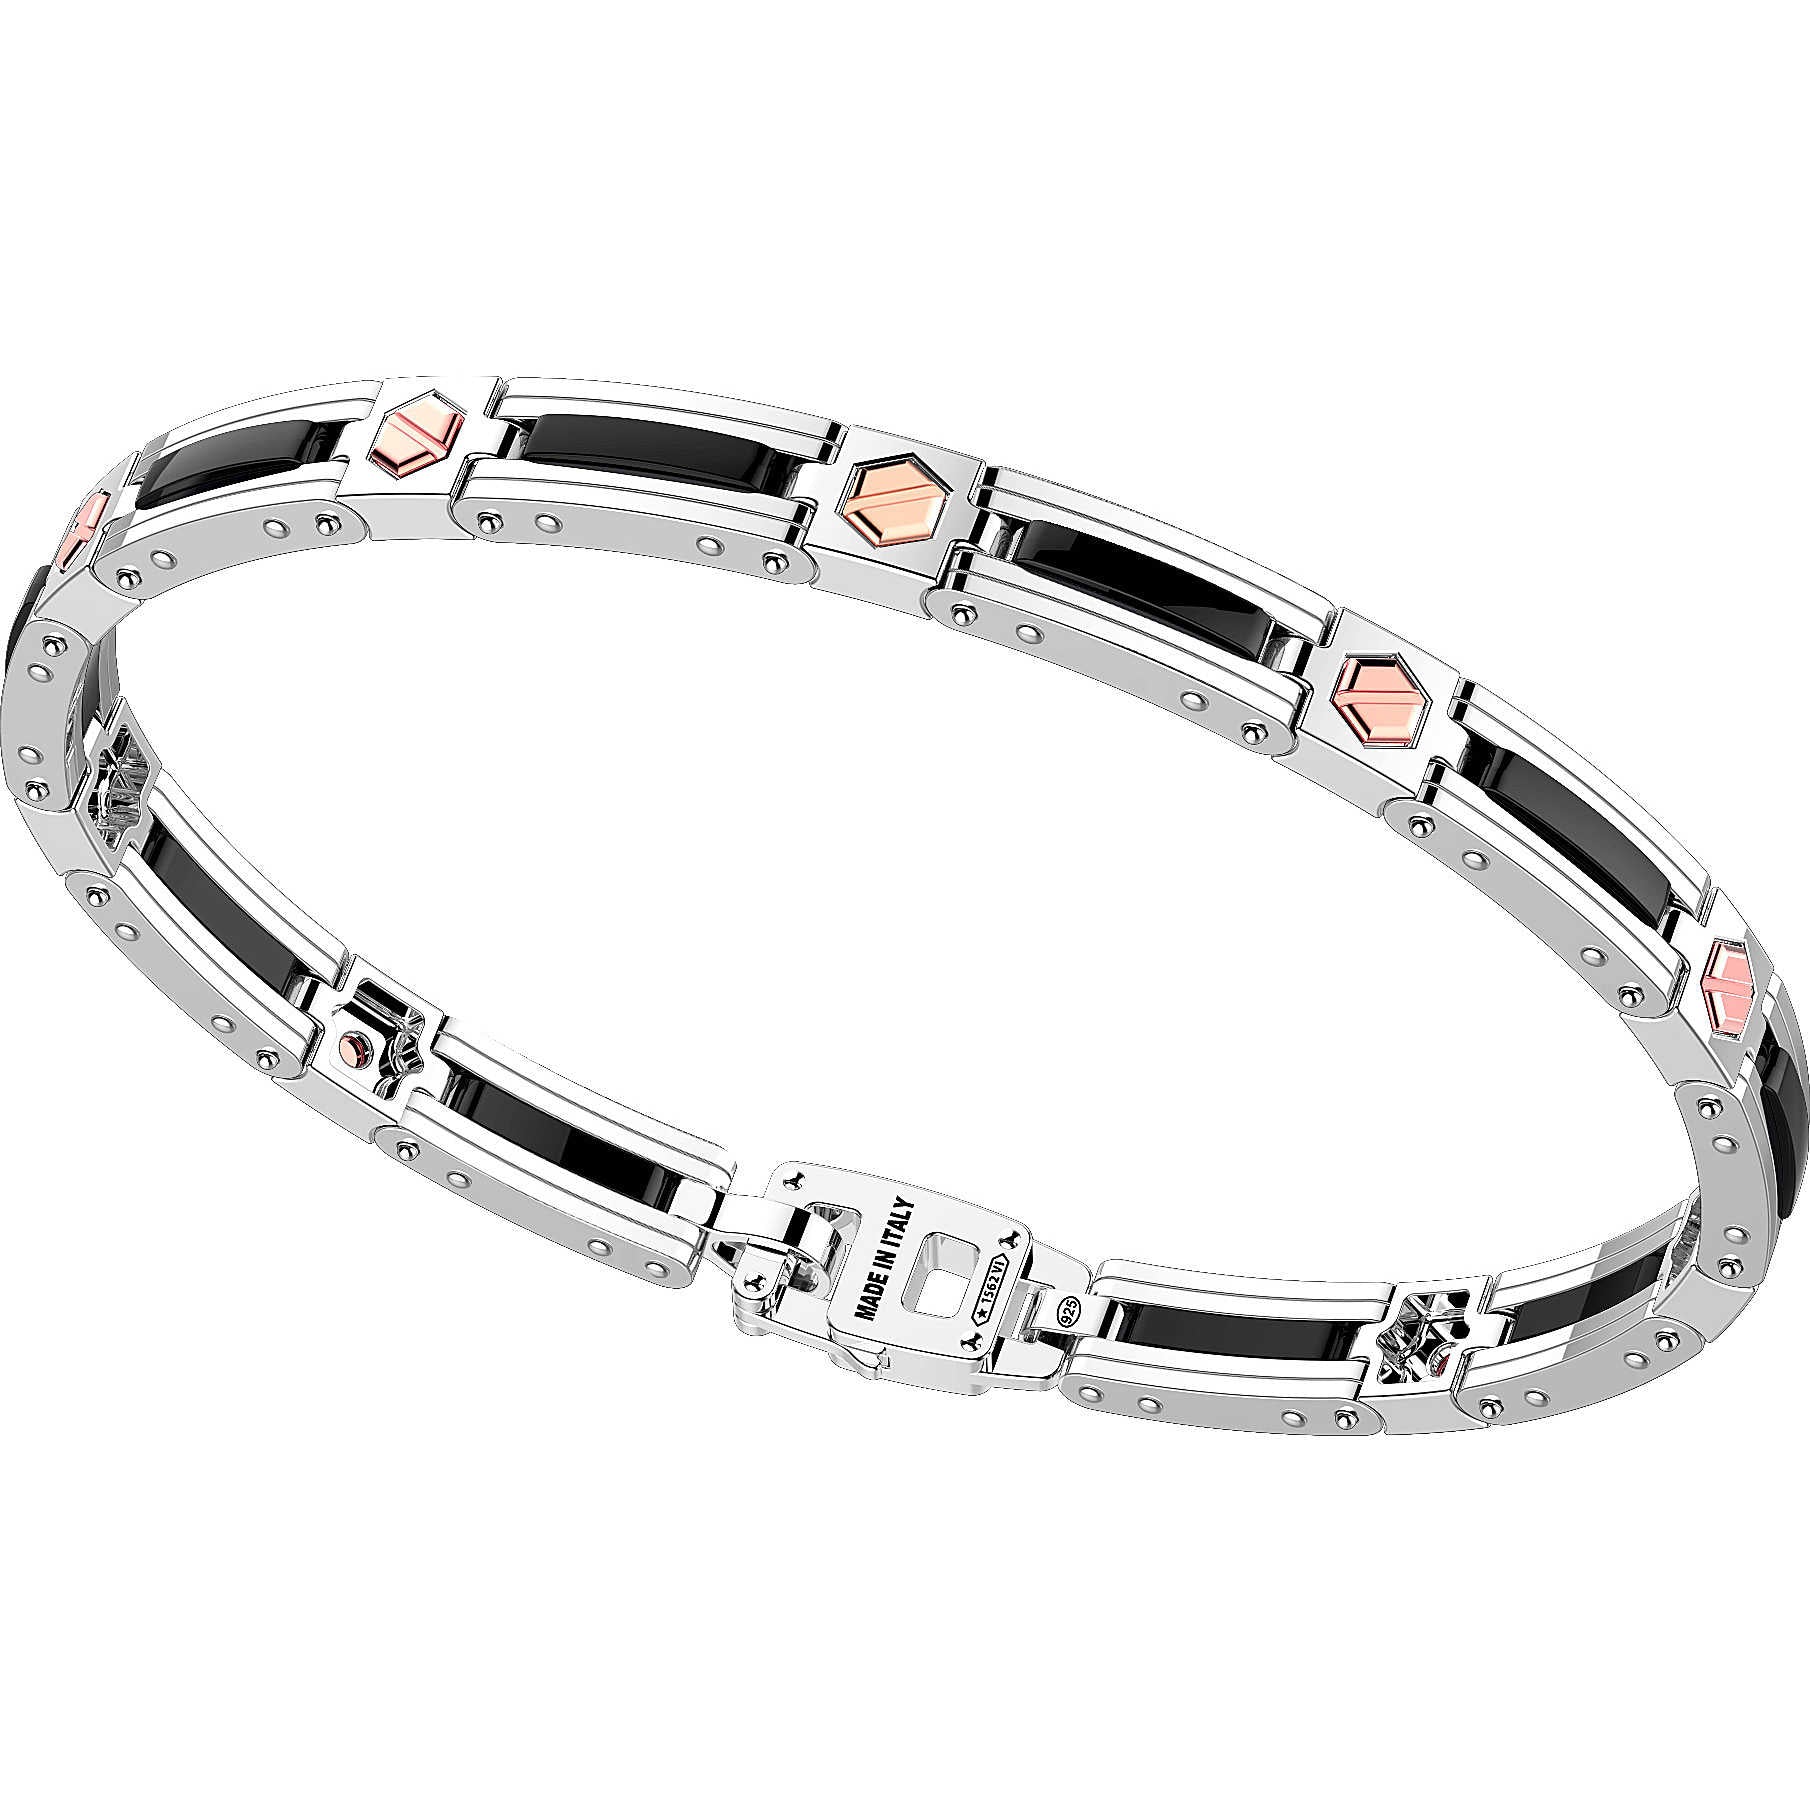 Silver and Ceramic with Rose-Gold Screws Bracelet | Zancan | Luby 